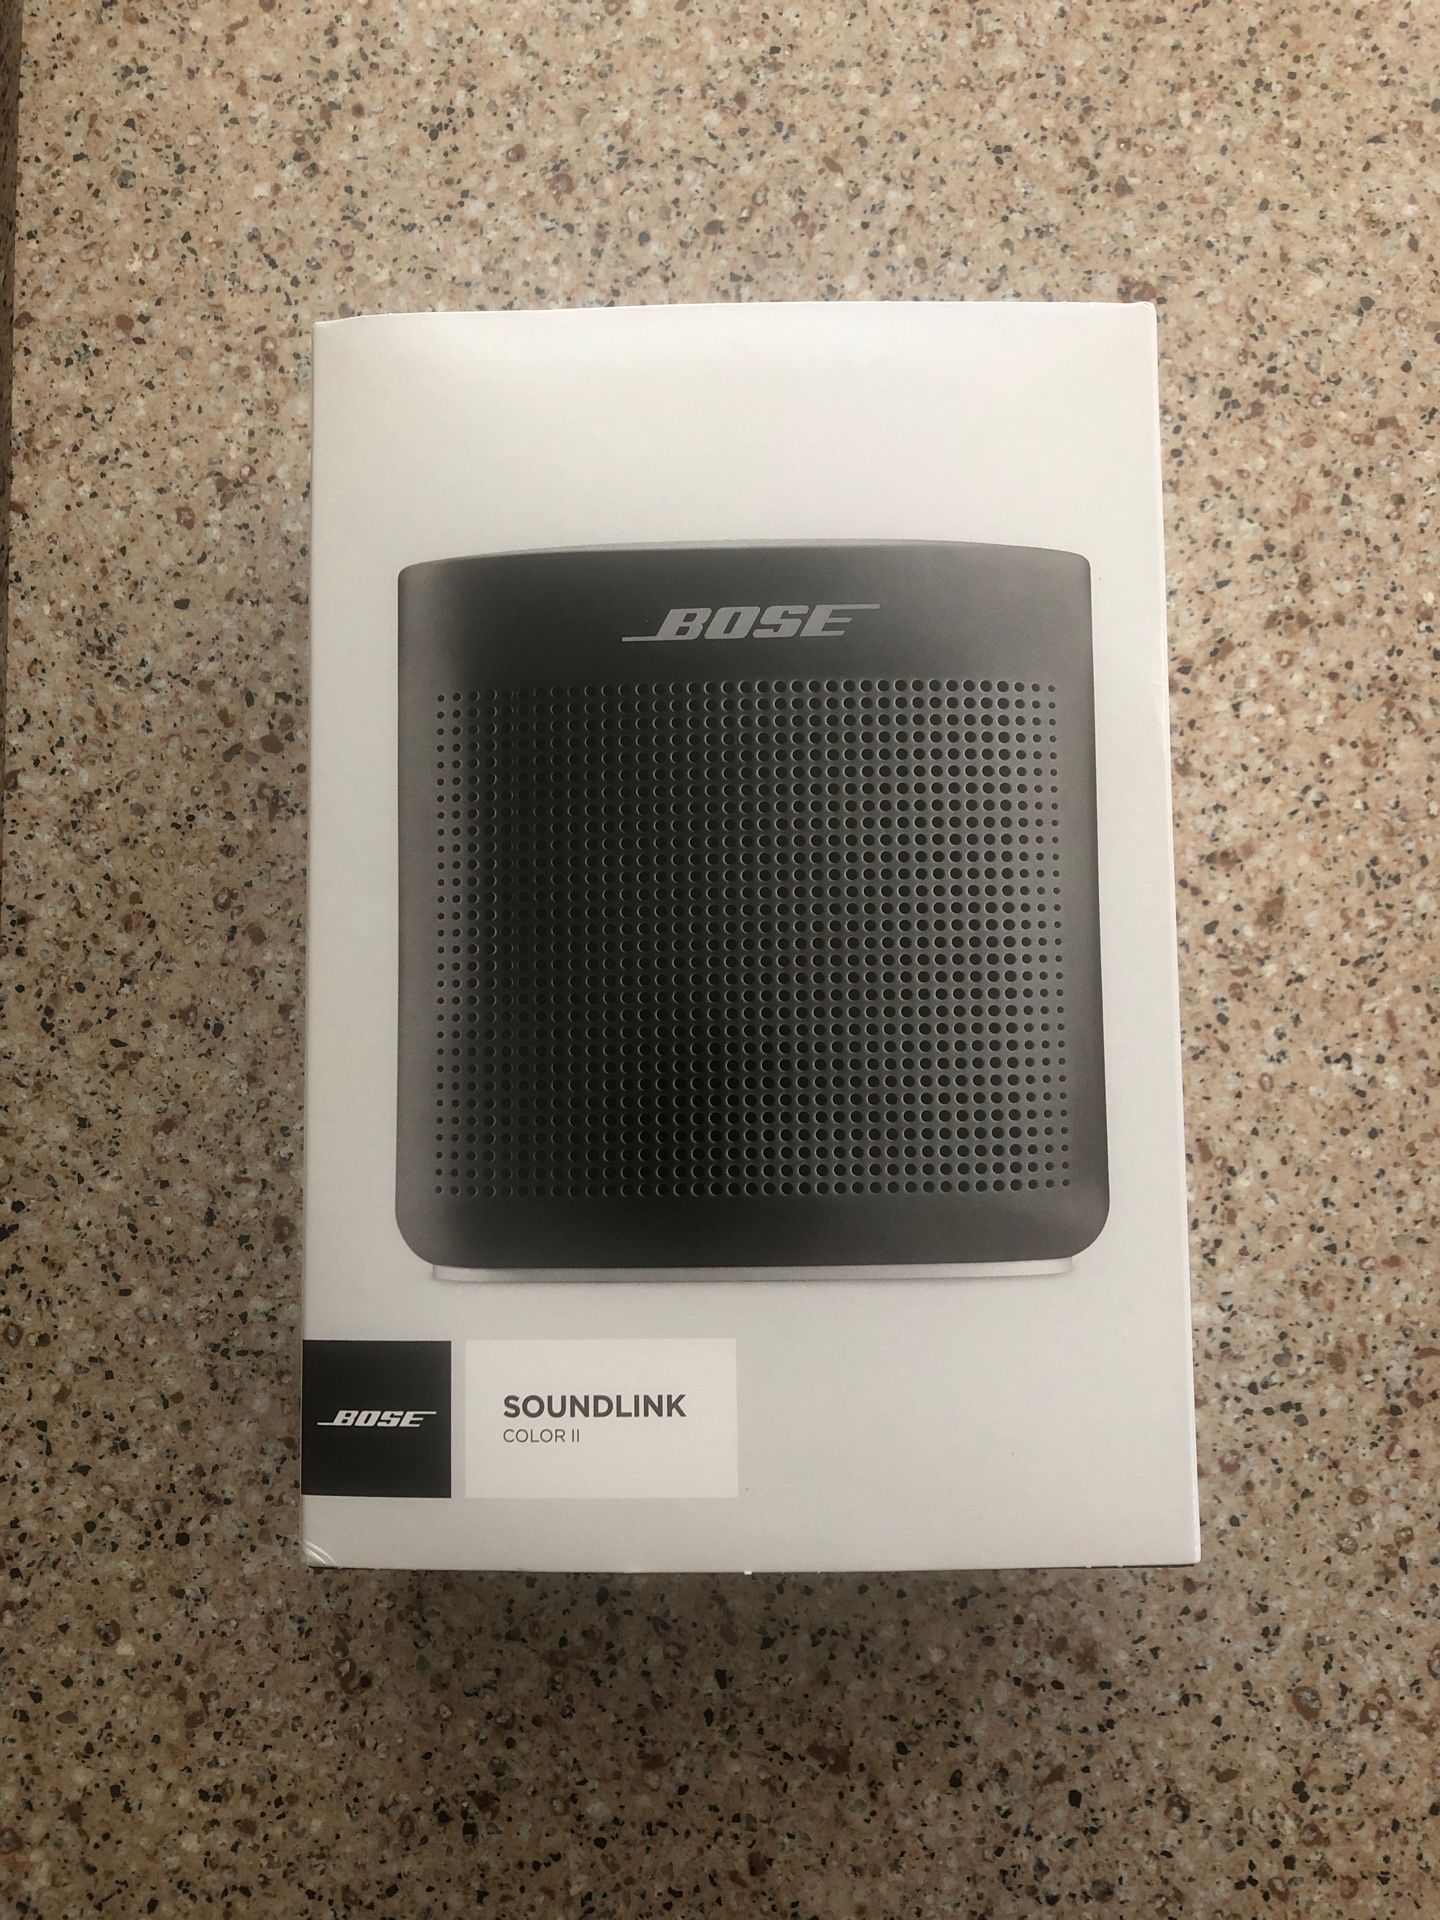 BOSE Soundlink Color ll -gray Néw in box!